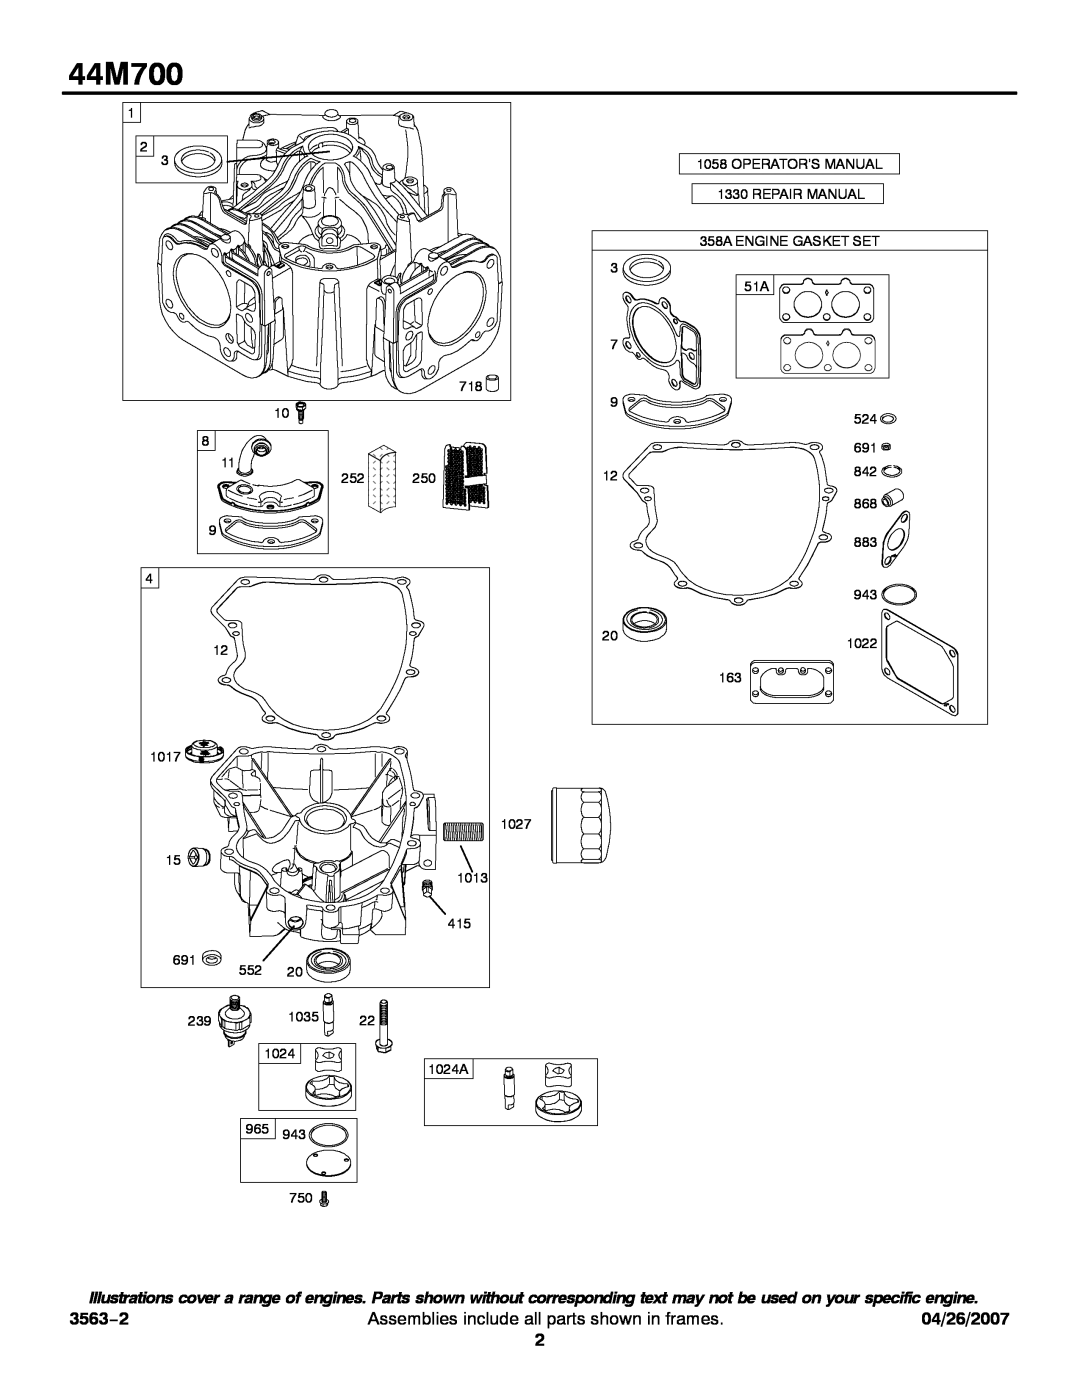 Briggs & Stratton 44M700 service manual 3563−2, Assemblies include all parts shown in frames, 04/26/2007 